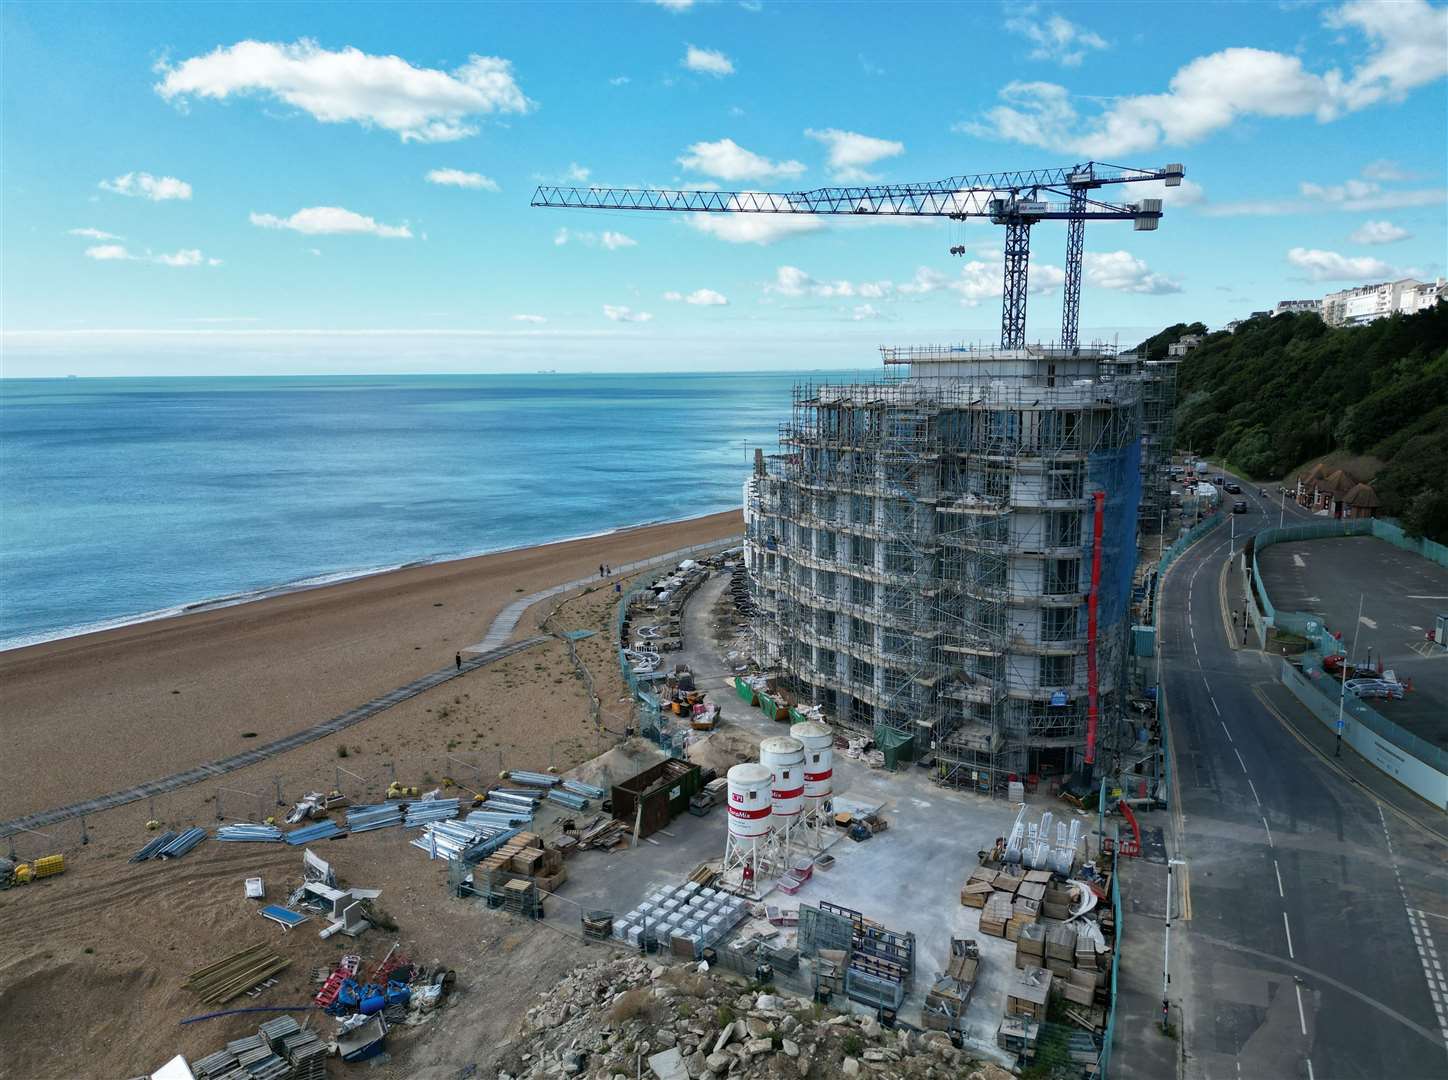 It is the first phase of the redevelopment of the seafront in Folkestone. Picture: Barry Goodwin